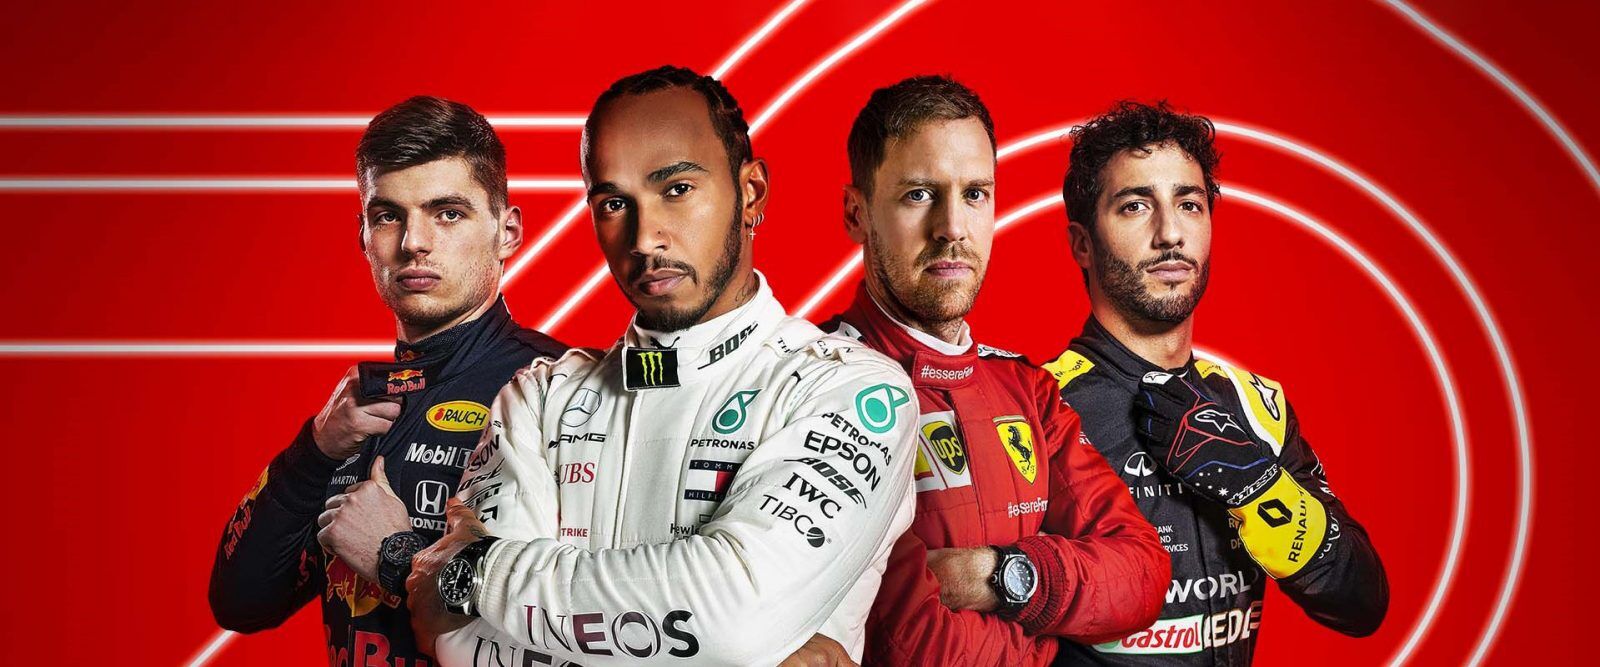 F1 2020 available for free on Xbox